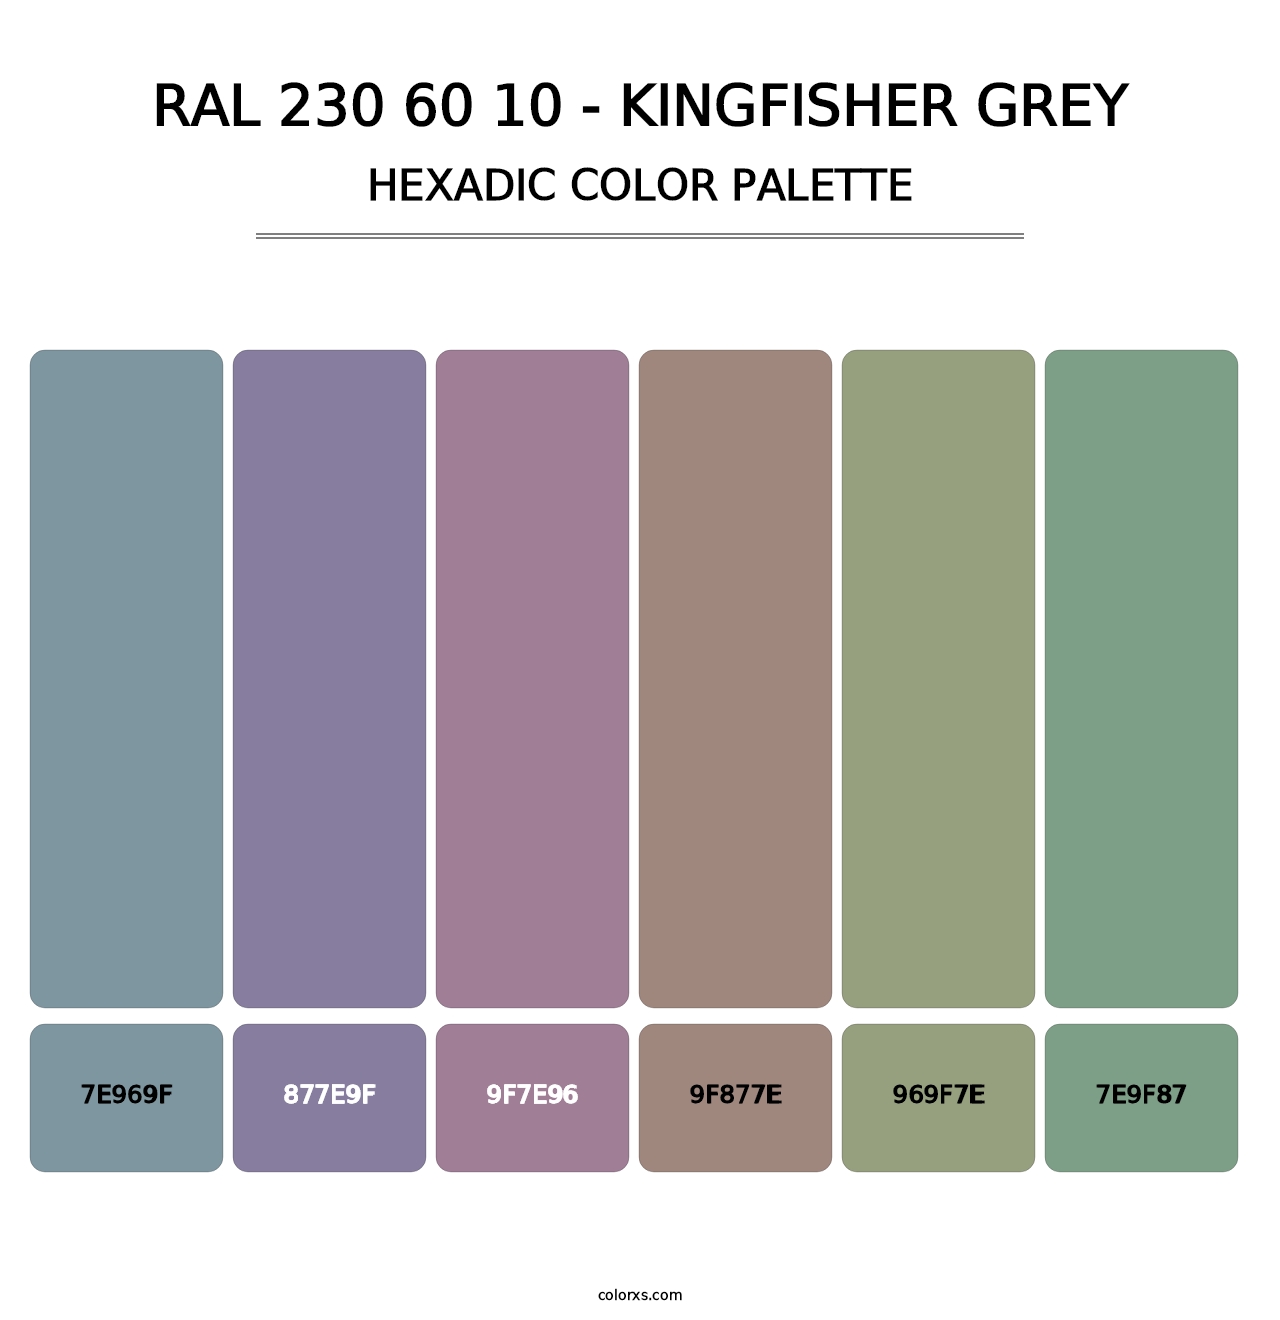 RAL 230 60 10 - Kingfisher Grey - Hexadic Color Palette